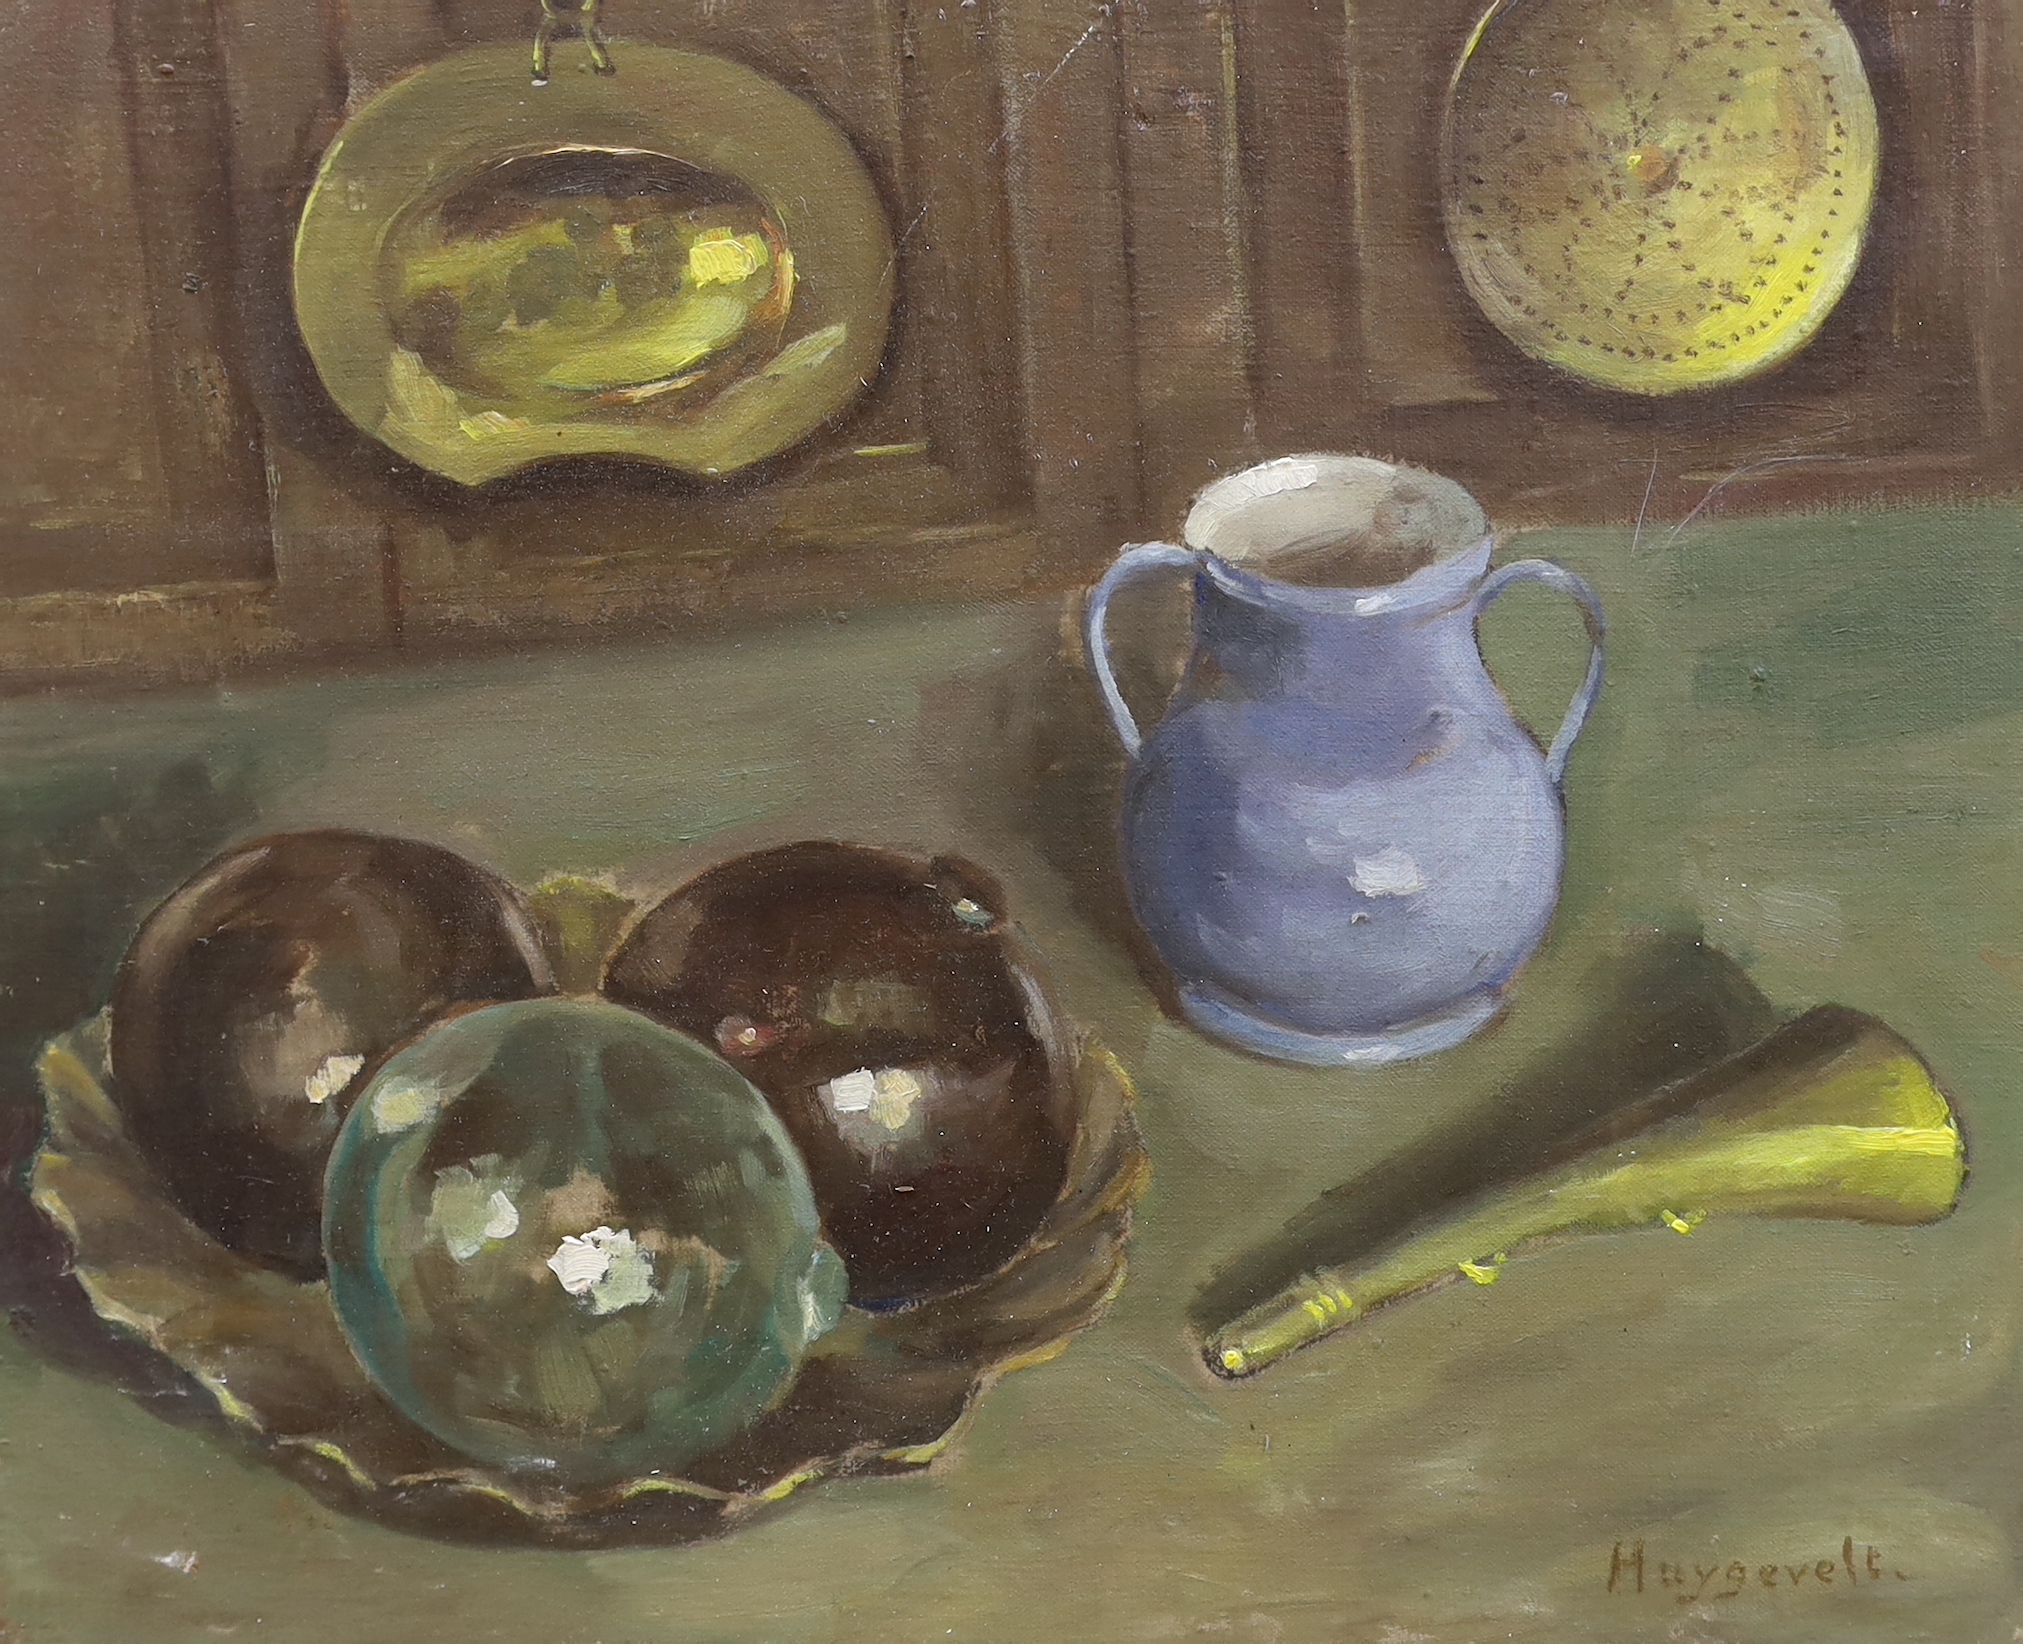 Haygevelt, oil on canvas, Still life of glass floats and brassware on a table top, signed, 50 x 60cm, unframed